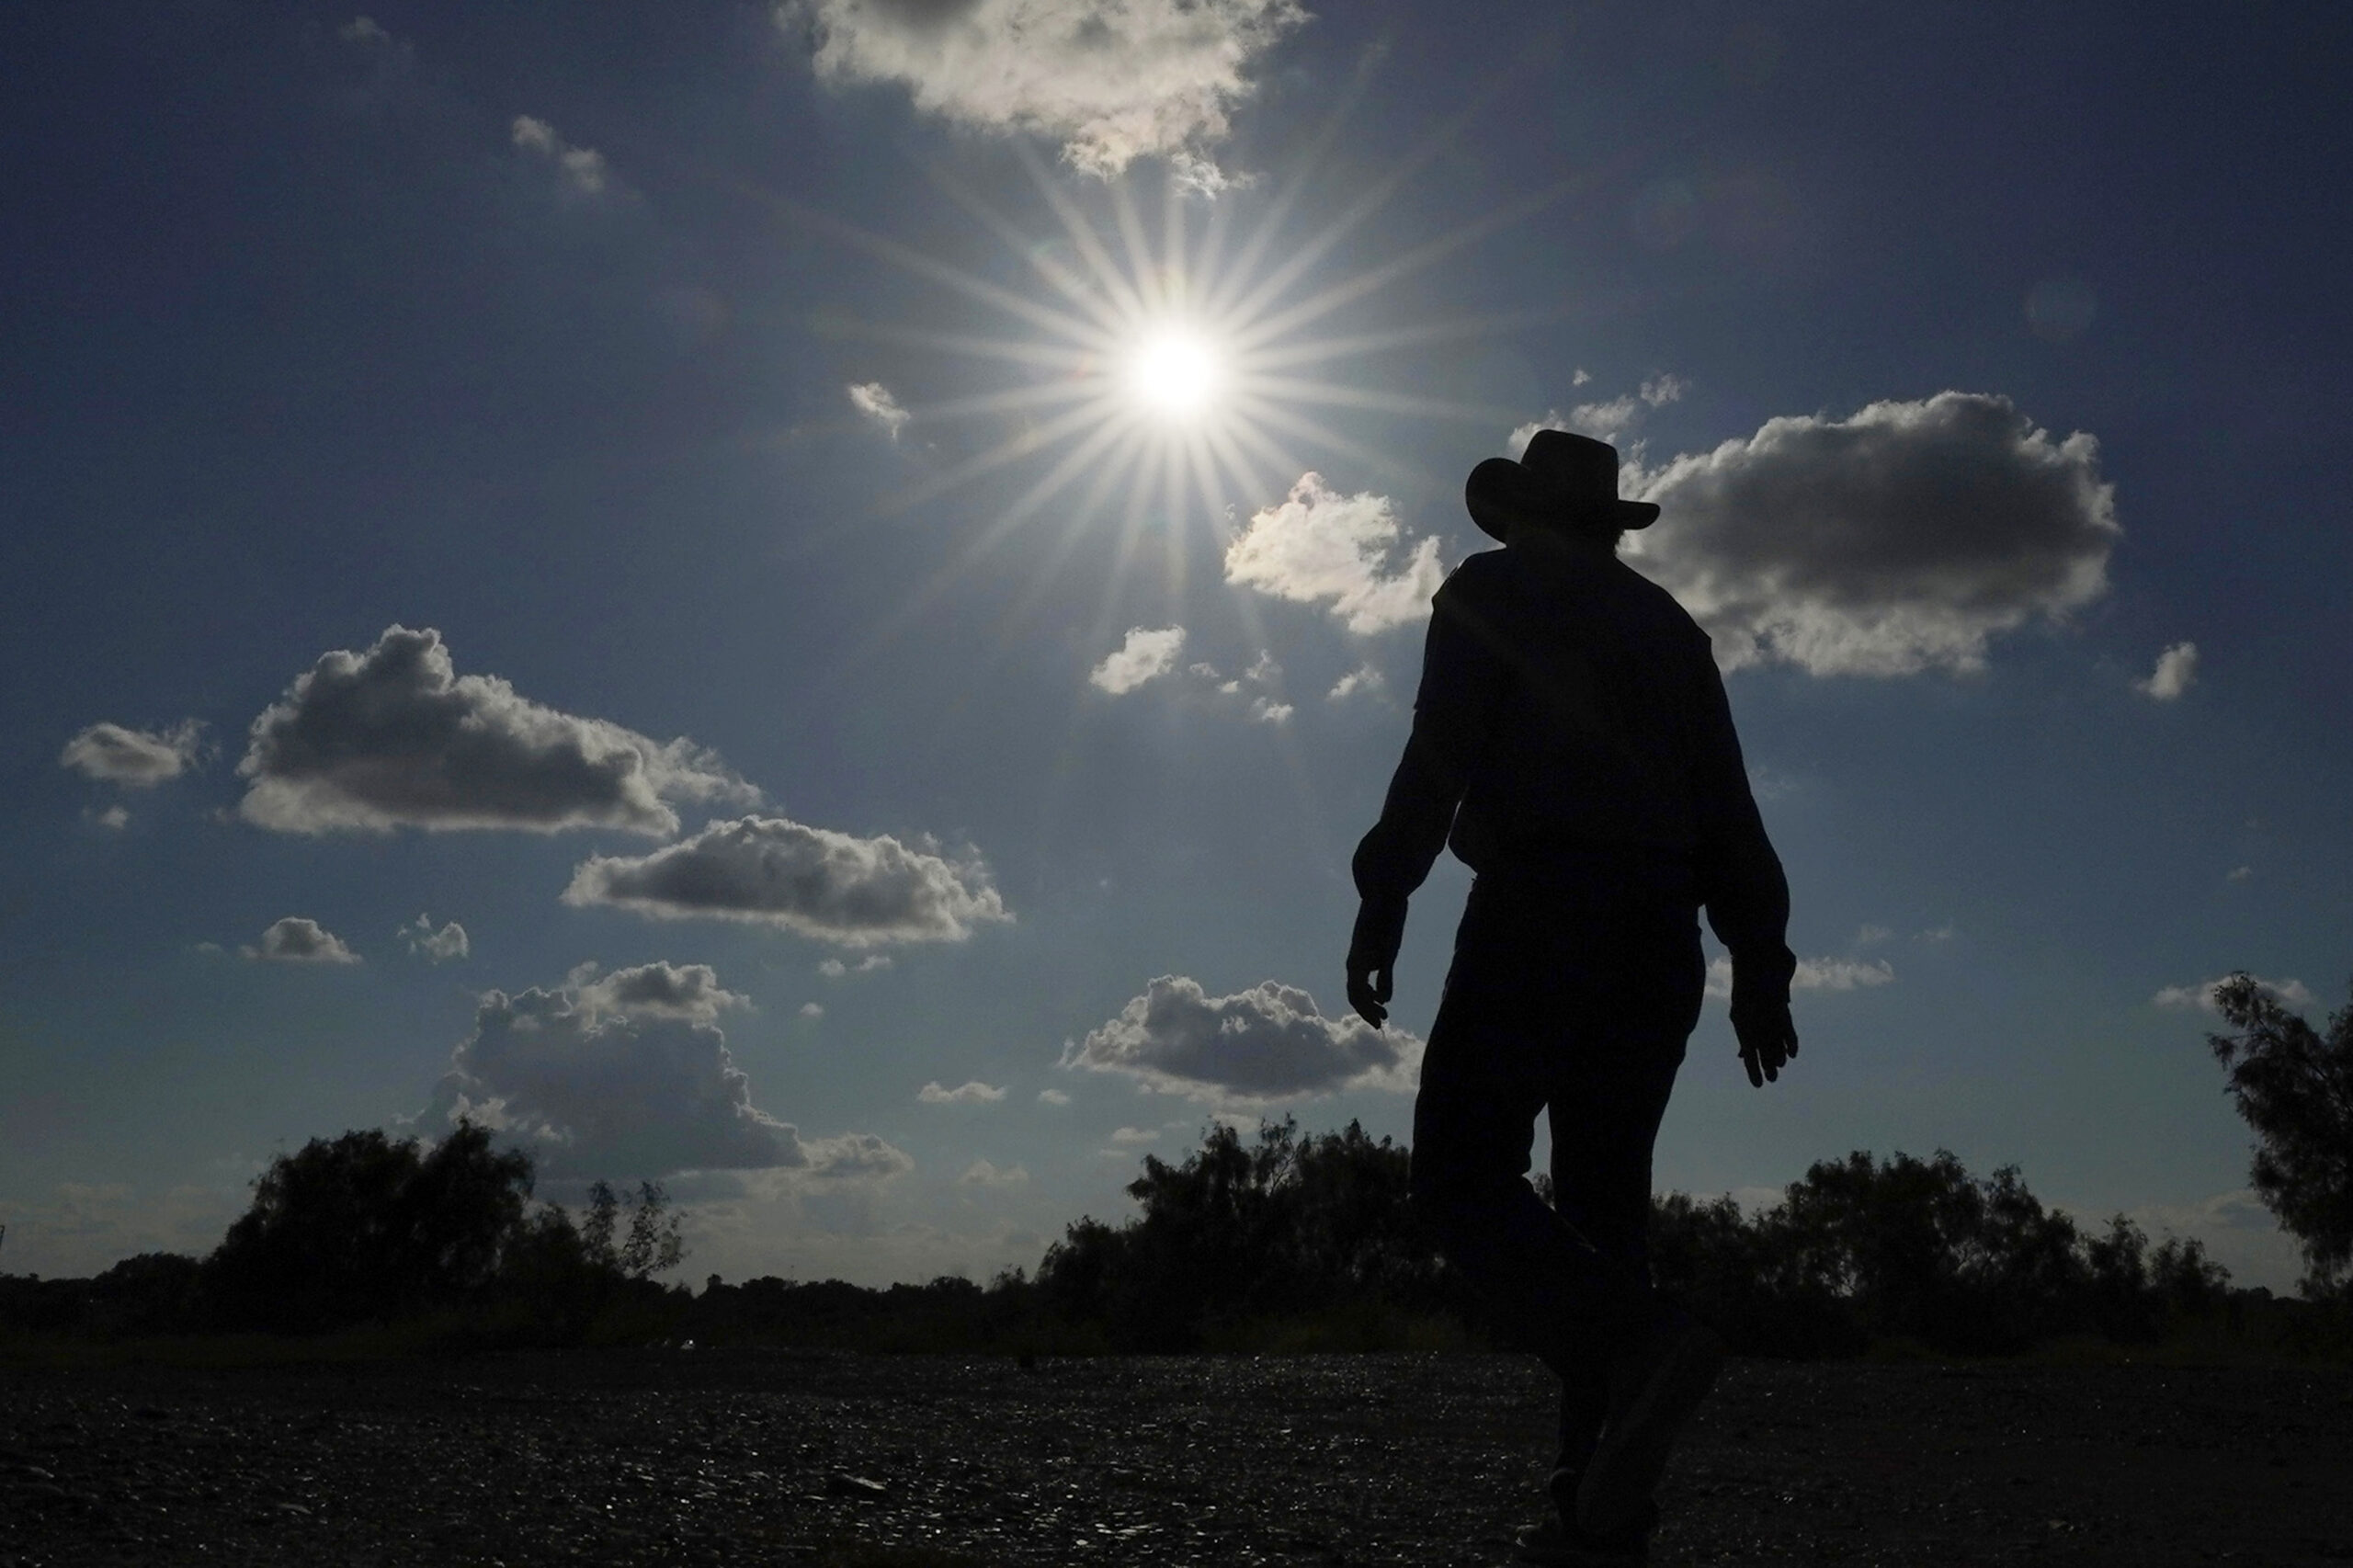 PHOENIX (AP) — A dangerous heat wave threatened a wide swath of the Southwest with potentially de...